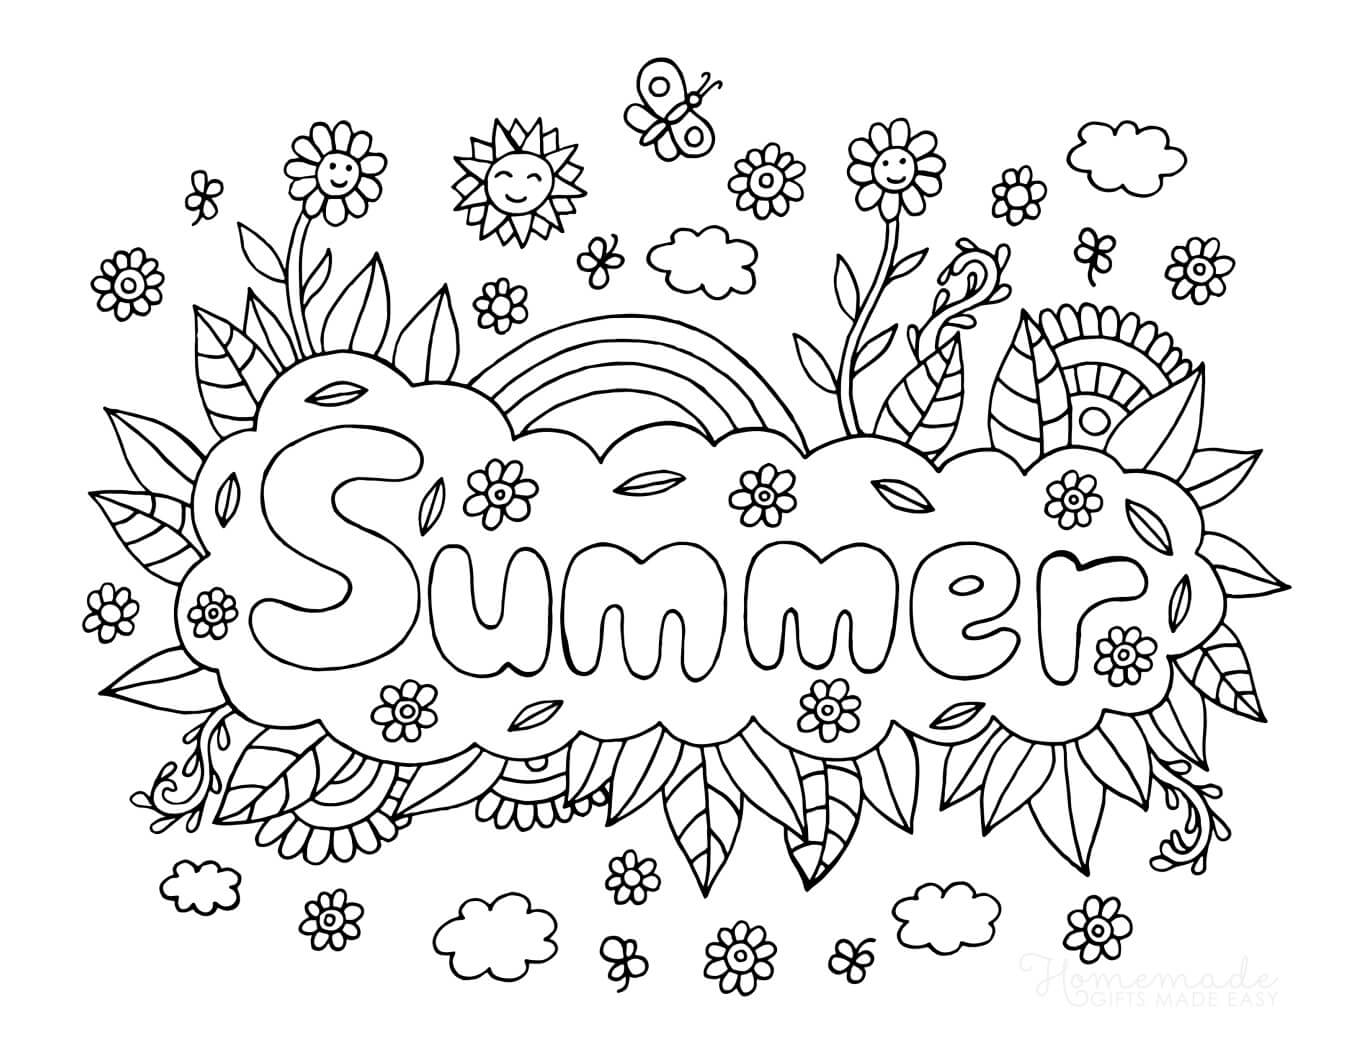 summer picture color ideas | easy to color coloring pages | free summer coloring pages